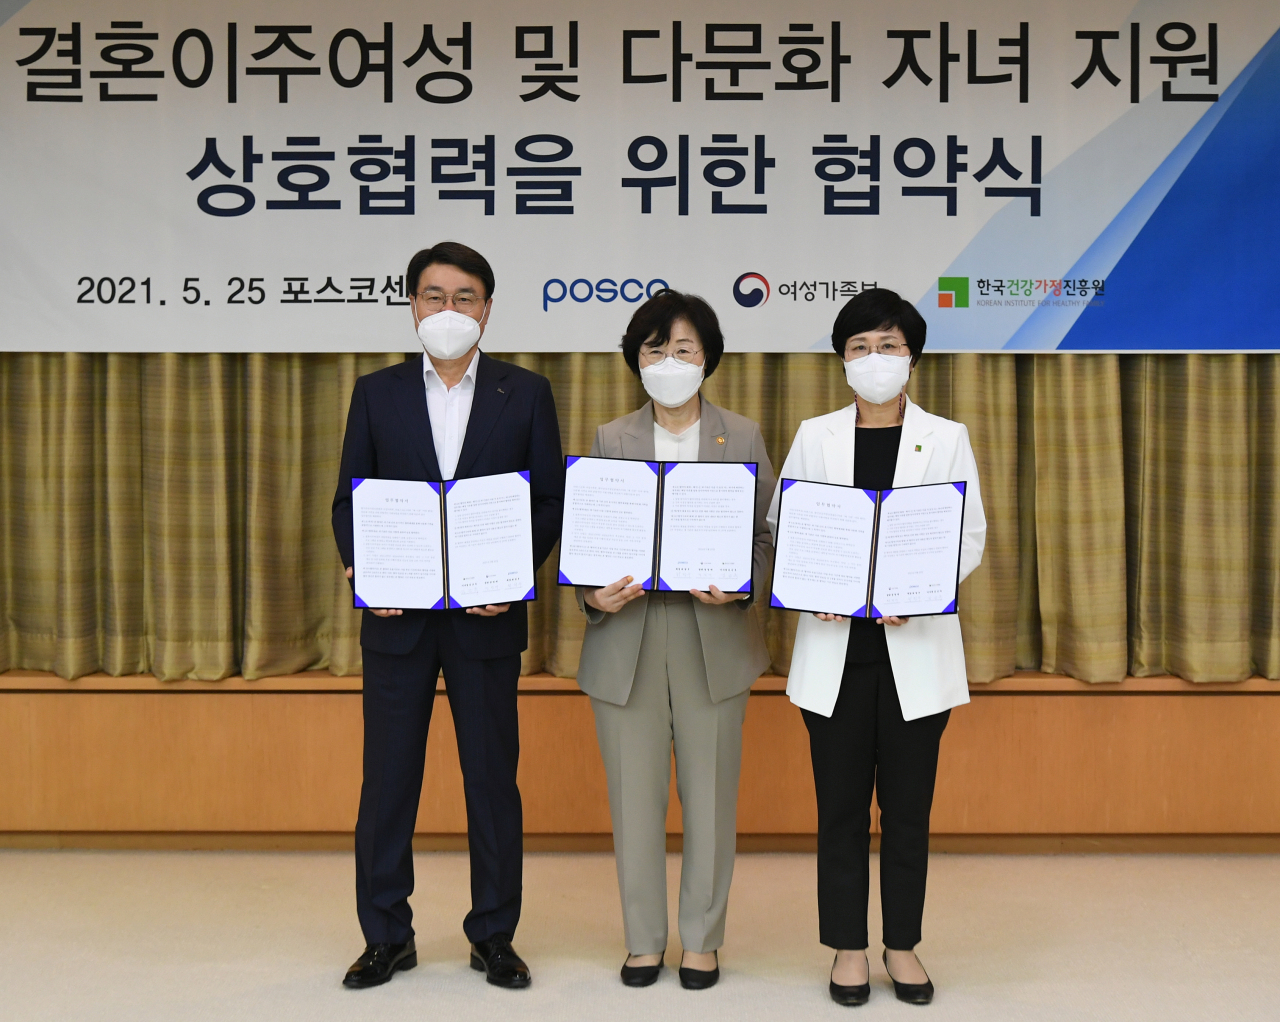 From right: Posco chairman Choi Jeong-woo, South Korean Gender Minister Chung Young-ai and chief of Korea Institute for Healthy Family Kim Keum-ok pose for photos at the steelmaker’s office in Seoul on Tuesday after signing a three-way memorandum of understanding. (Posco)